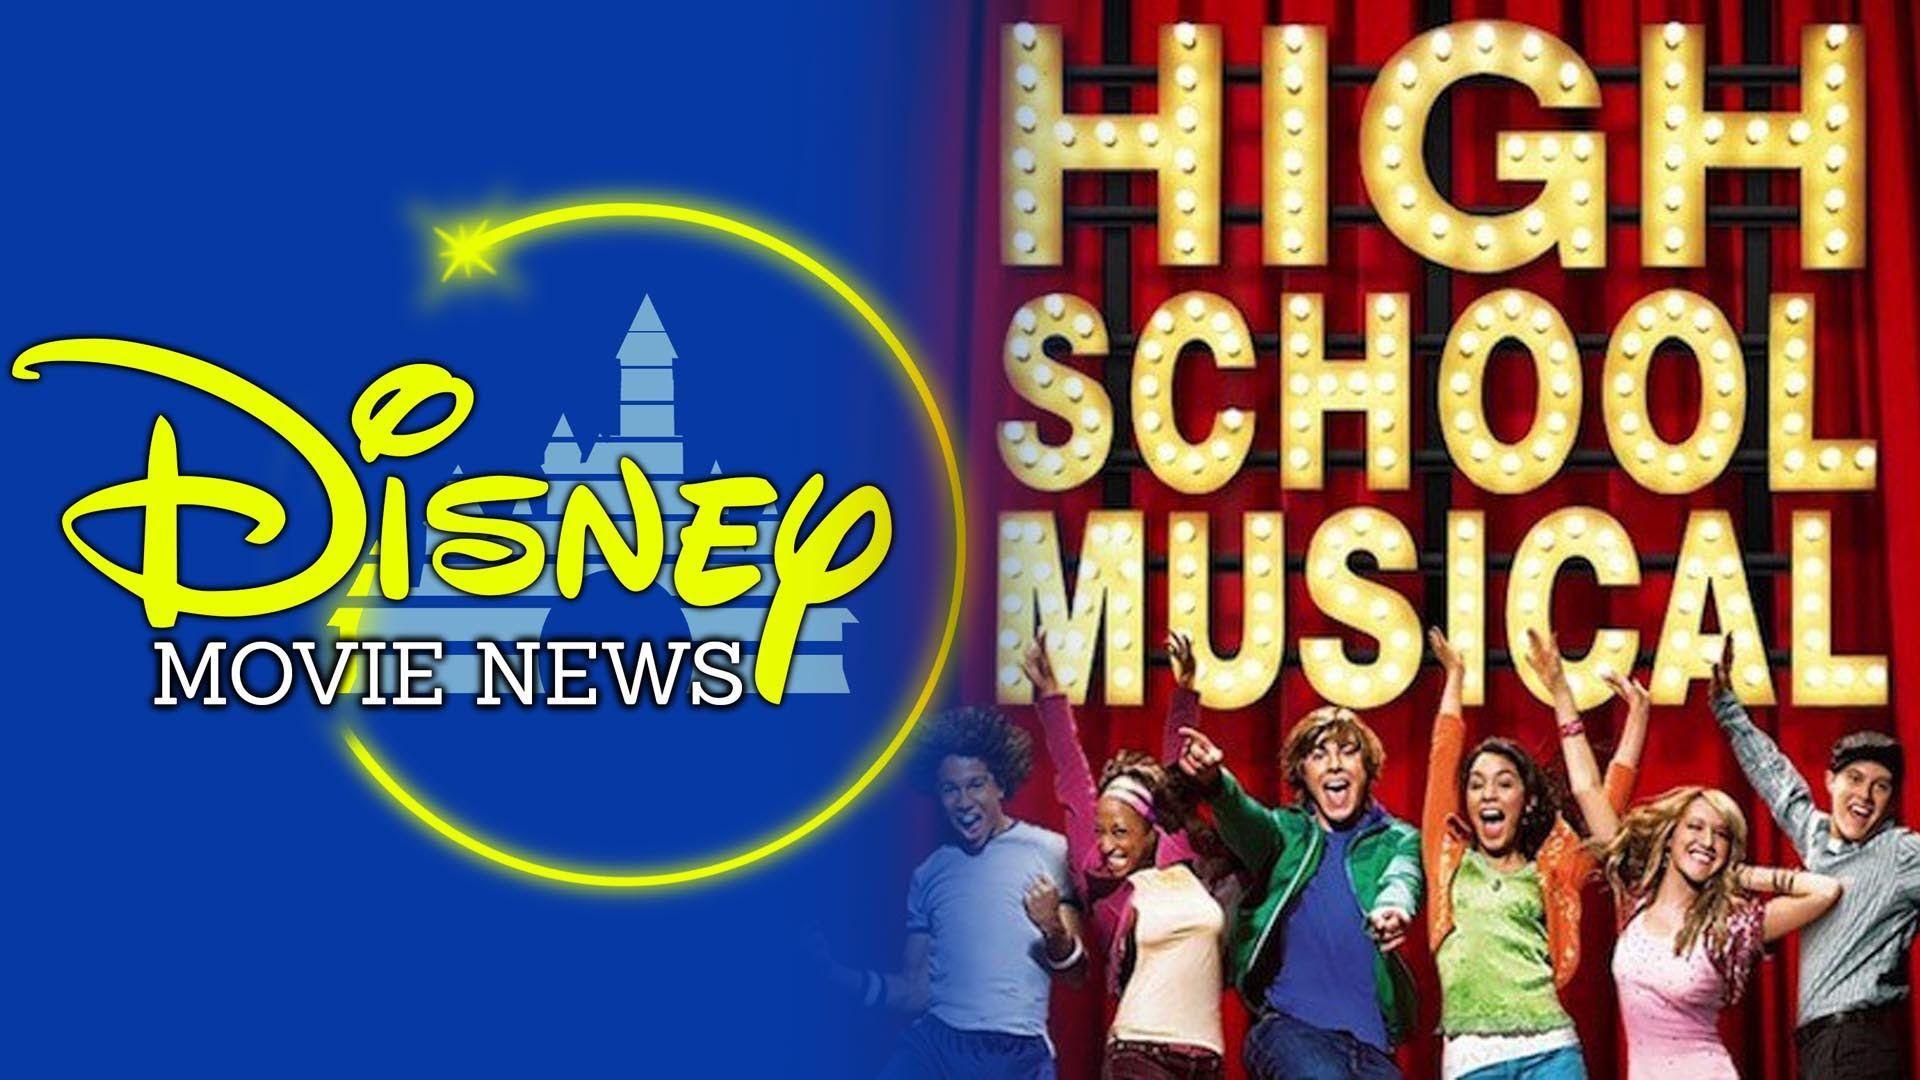 High School Musical Big Hero 6 on TV and More! Movie